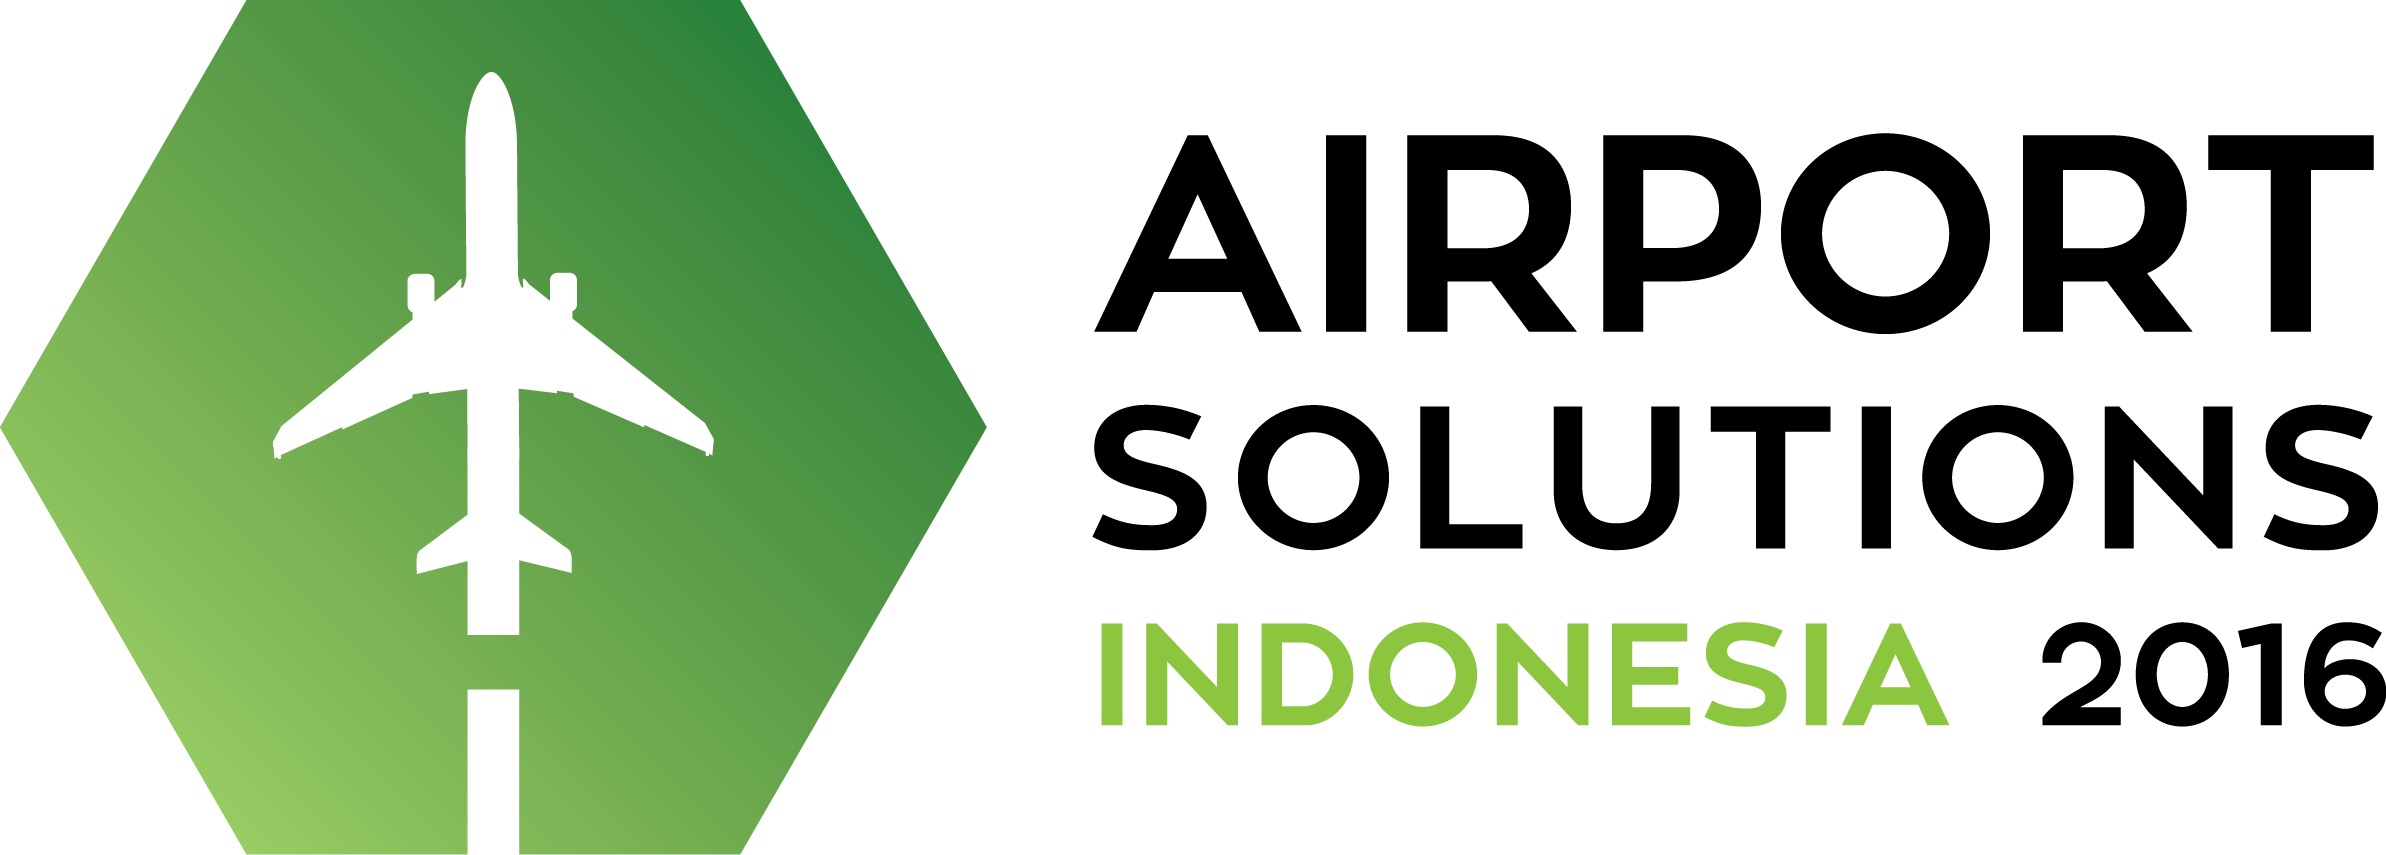 Airport Solutions Indonesia 2016 - The perfect platform to showcase your business